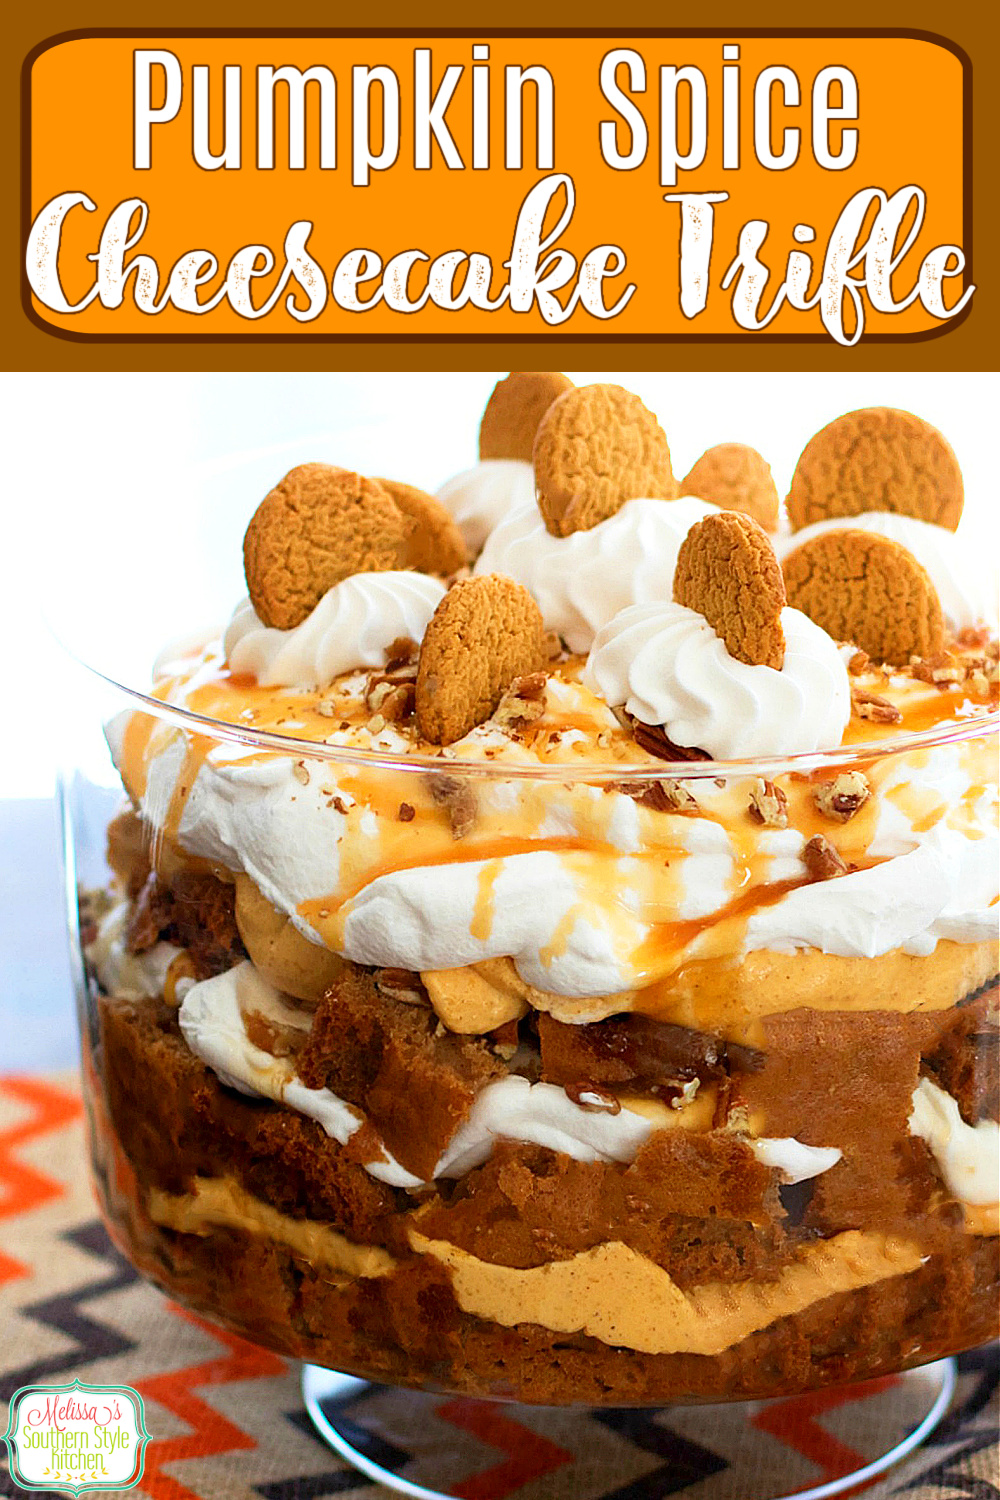 Layers of pumpkin cheesecake, spice cake and a caramel drizzle takes this seasonal trifle to another level! #pumpkinspice #pumpkinchneesecake #pumpkintrifle #triflerecipes #falldesserts #thanksgiving #cakes #holidaybaking #southernfood #southernrecipes #holidaydesserts #desserts #pumpkin #dessertfoodrecipes via @melissasssk